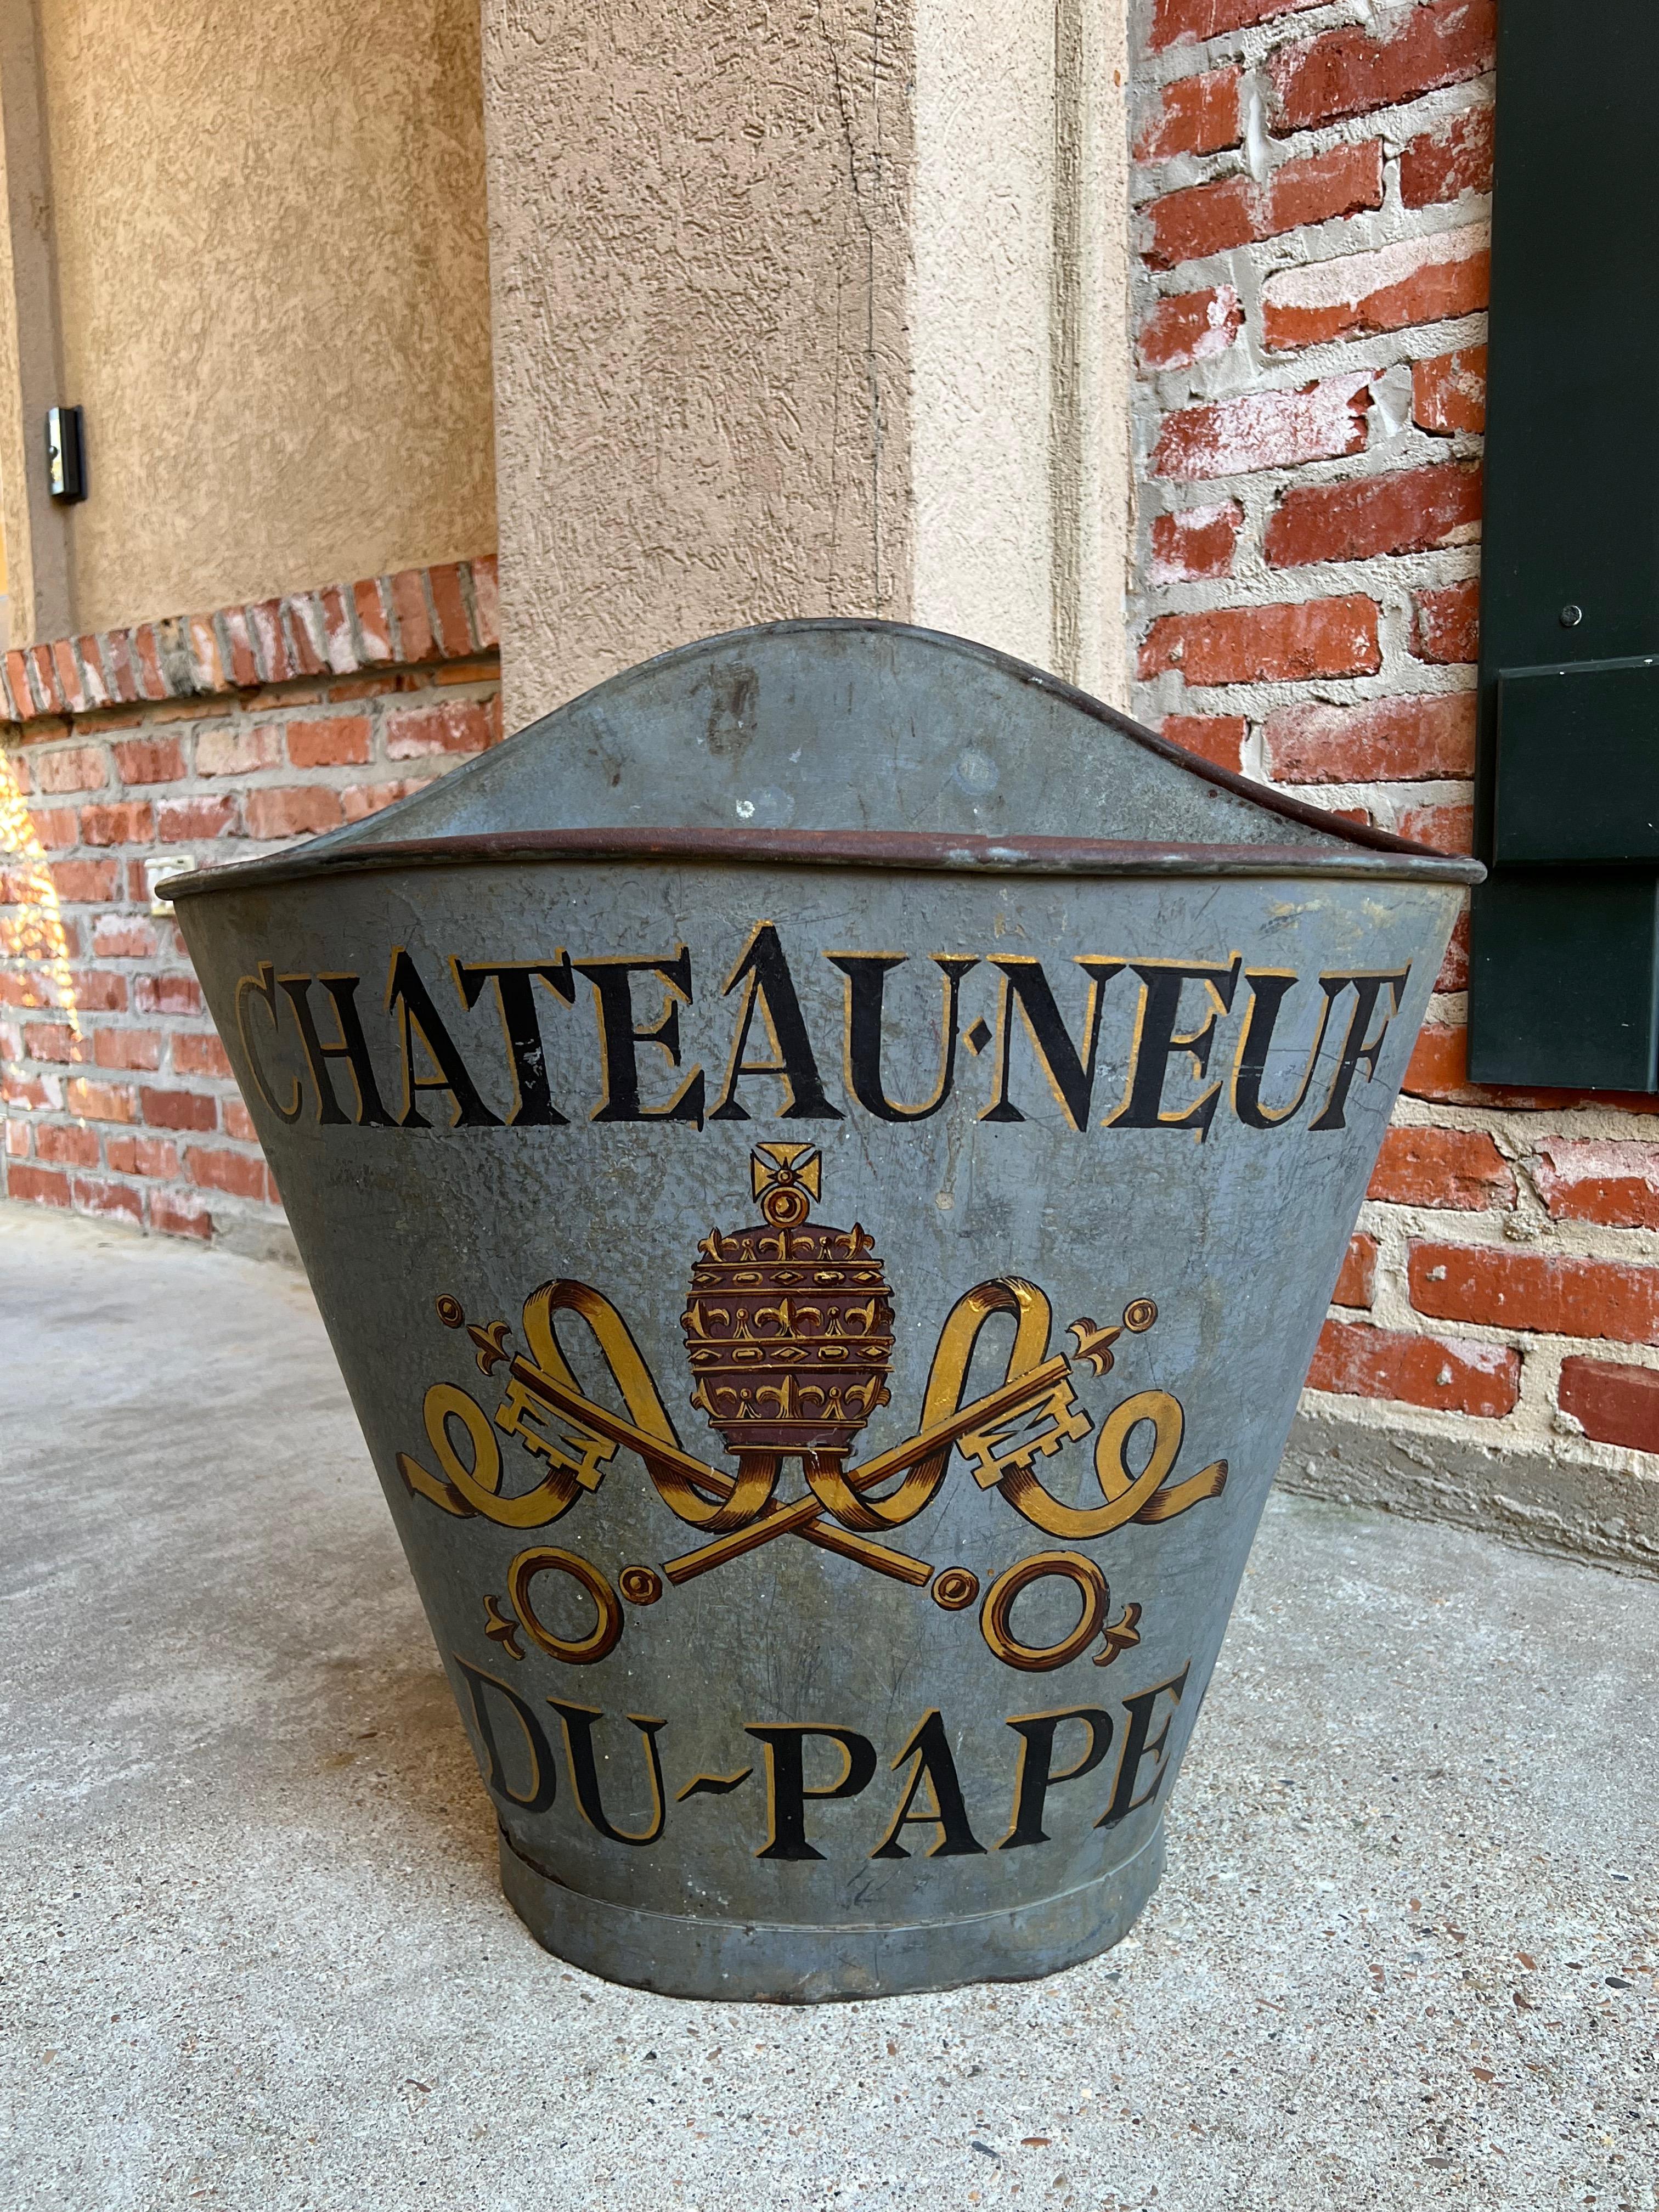 19th Century French vineyard grape hod hotte bucket wine vineyard tole painted.

Direct from France, a wonderful antique metal grape hod or “hotte”, with stunning hand painted French designed artwork. In the 19th century French vineyards, these